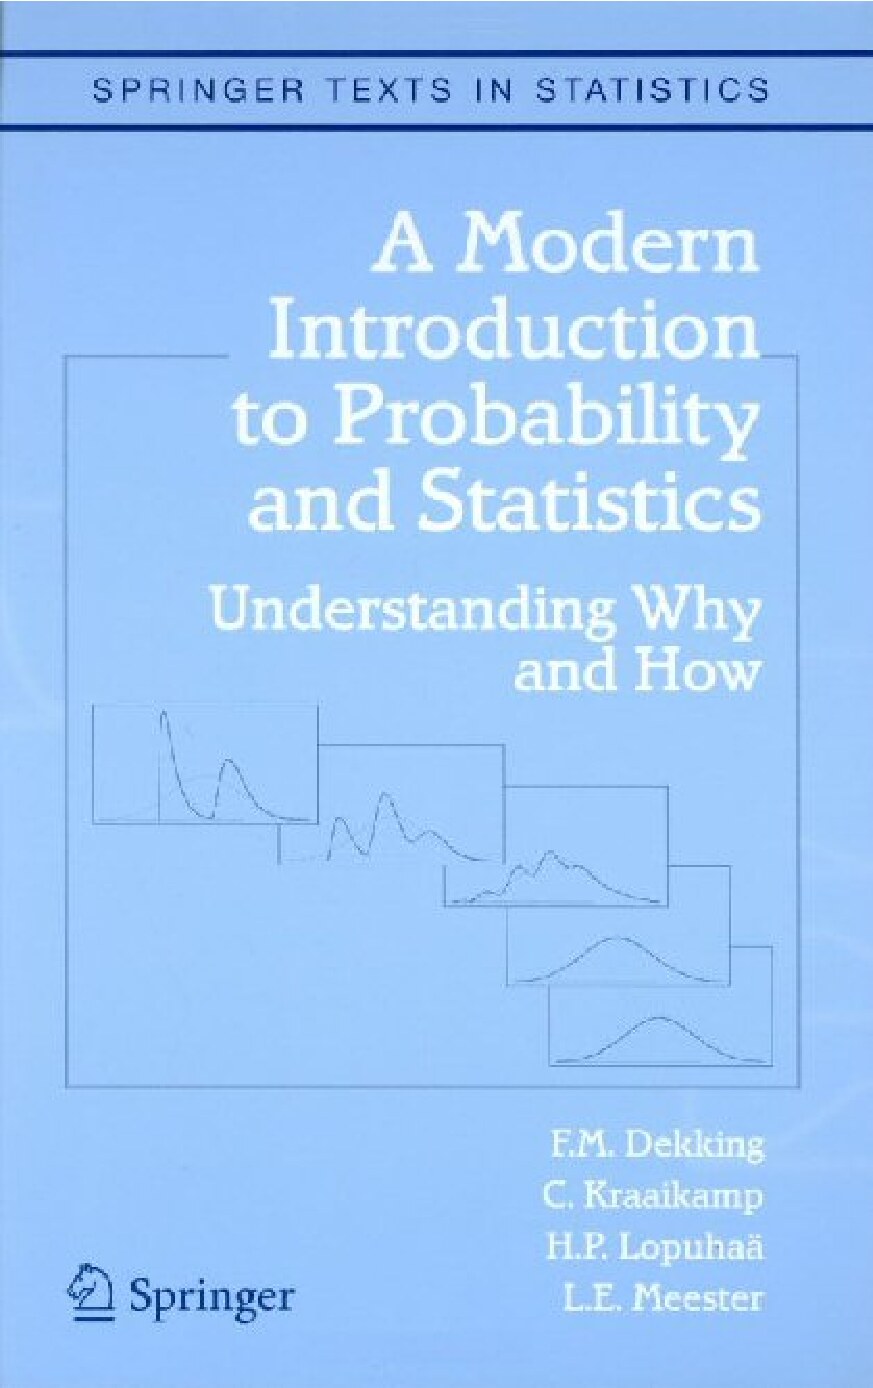 A modern introduction to probability & statistics